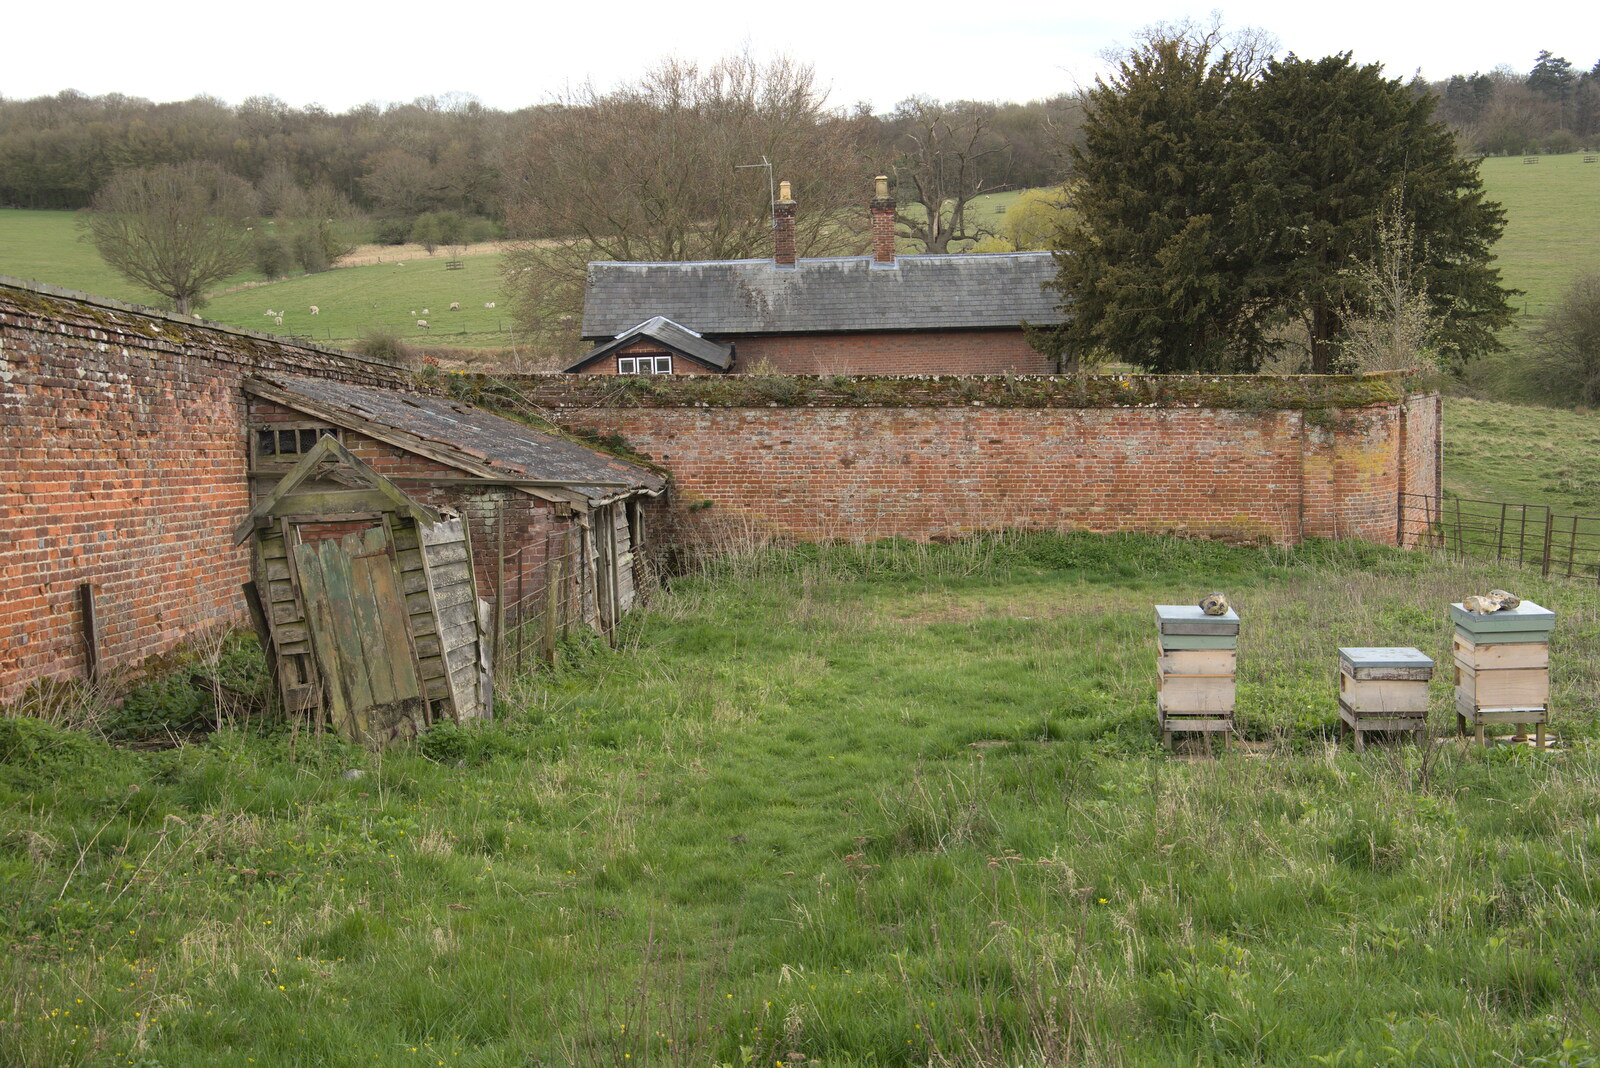 A small walled garden from A Return to Ickworth House, Horringer, Suffolk - 11th April 2021